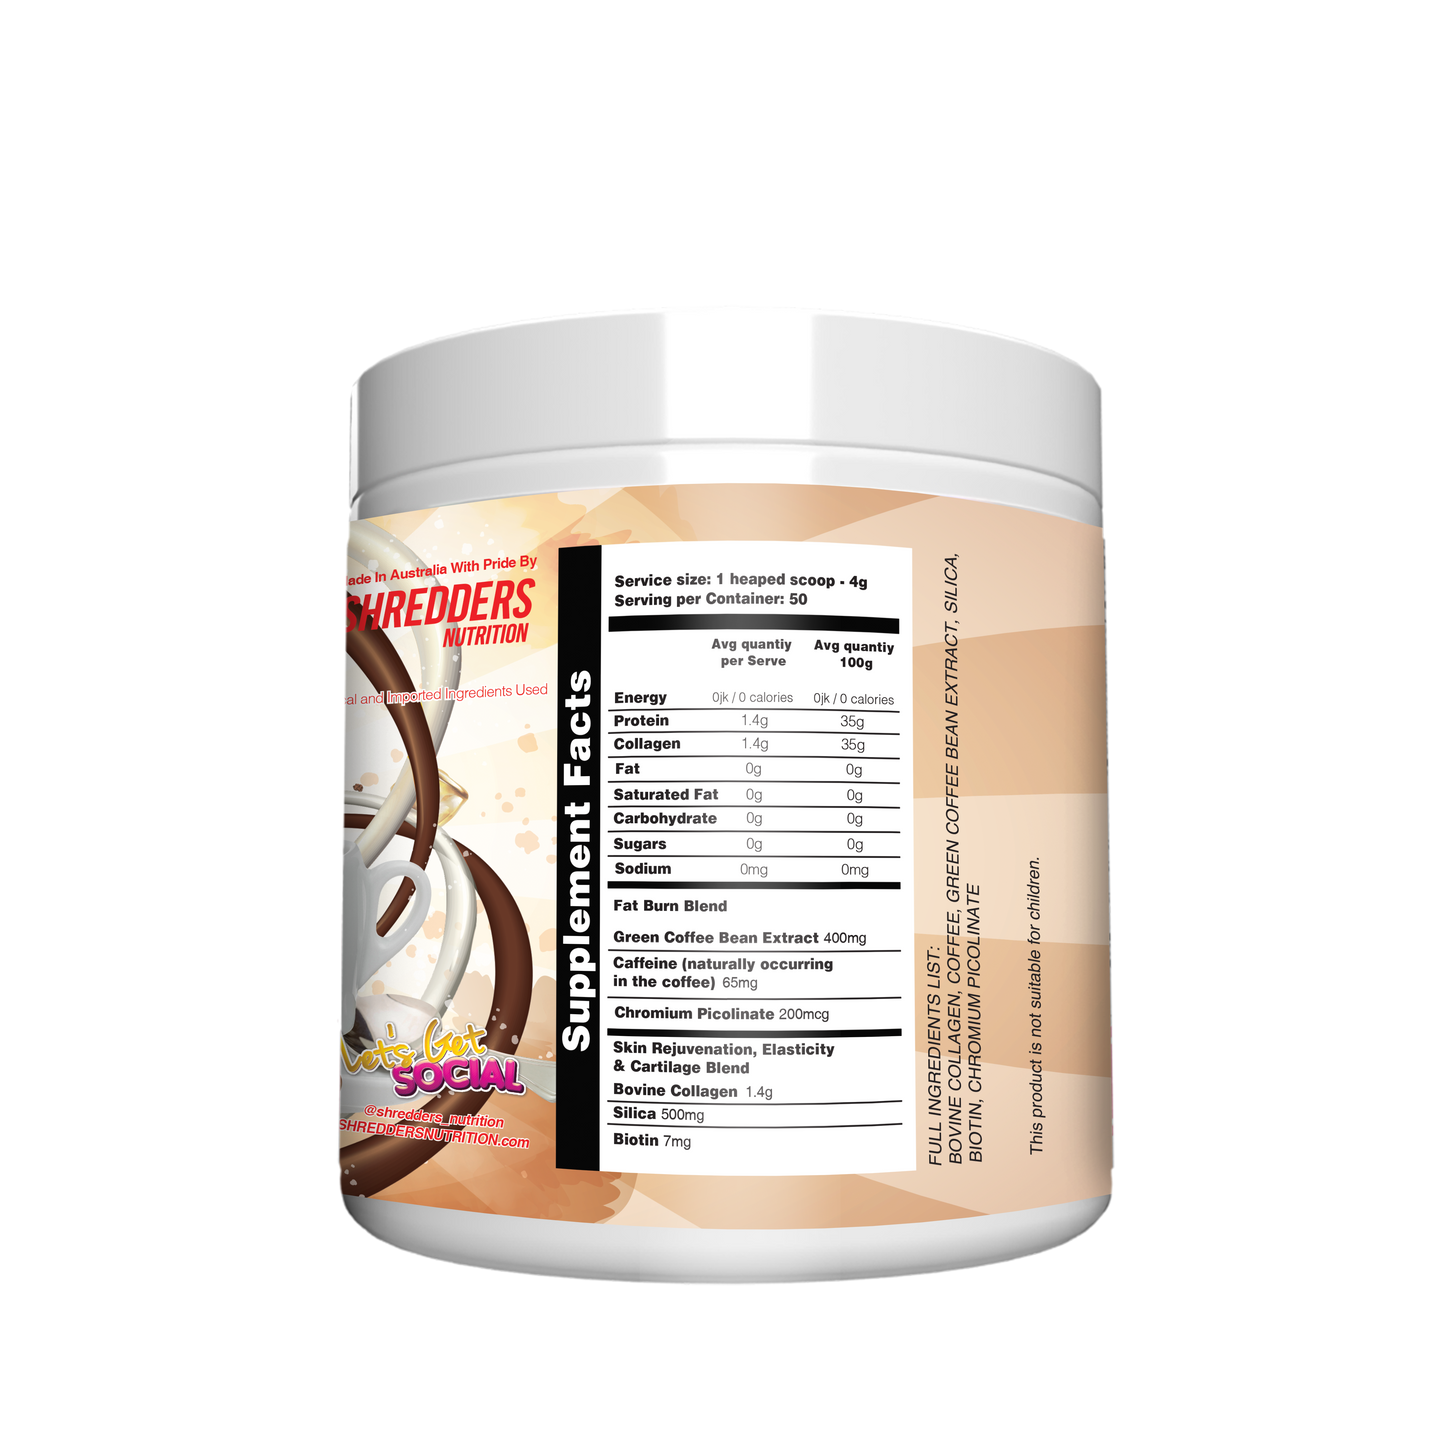 THERMOGENIC COLLAGEN COFFEE